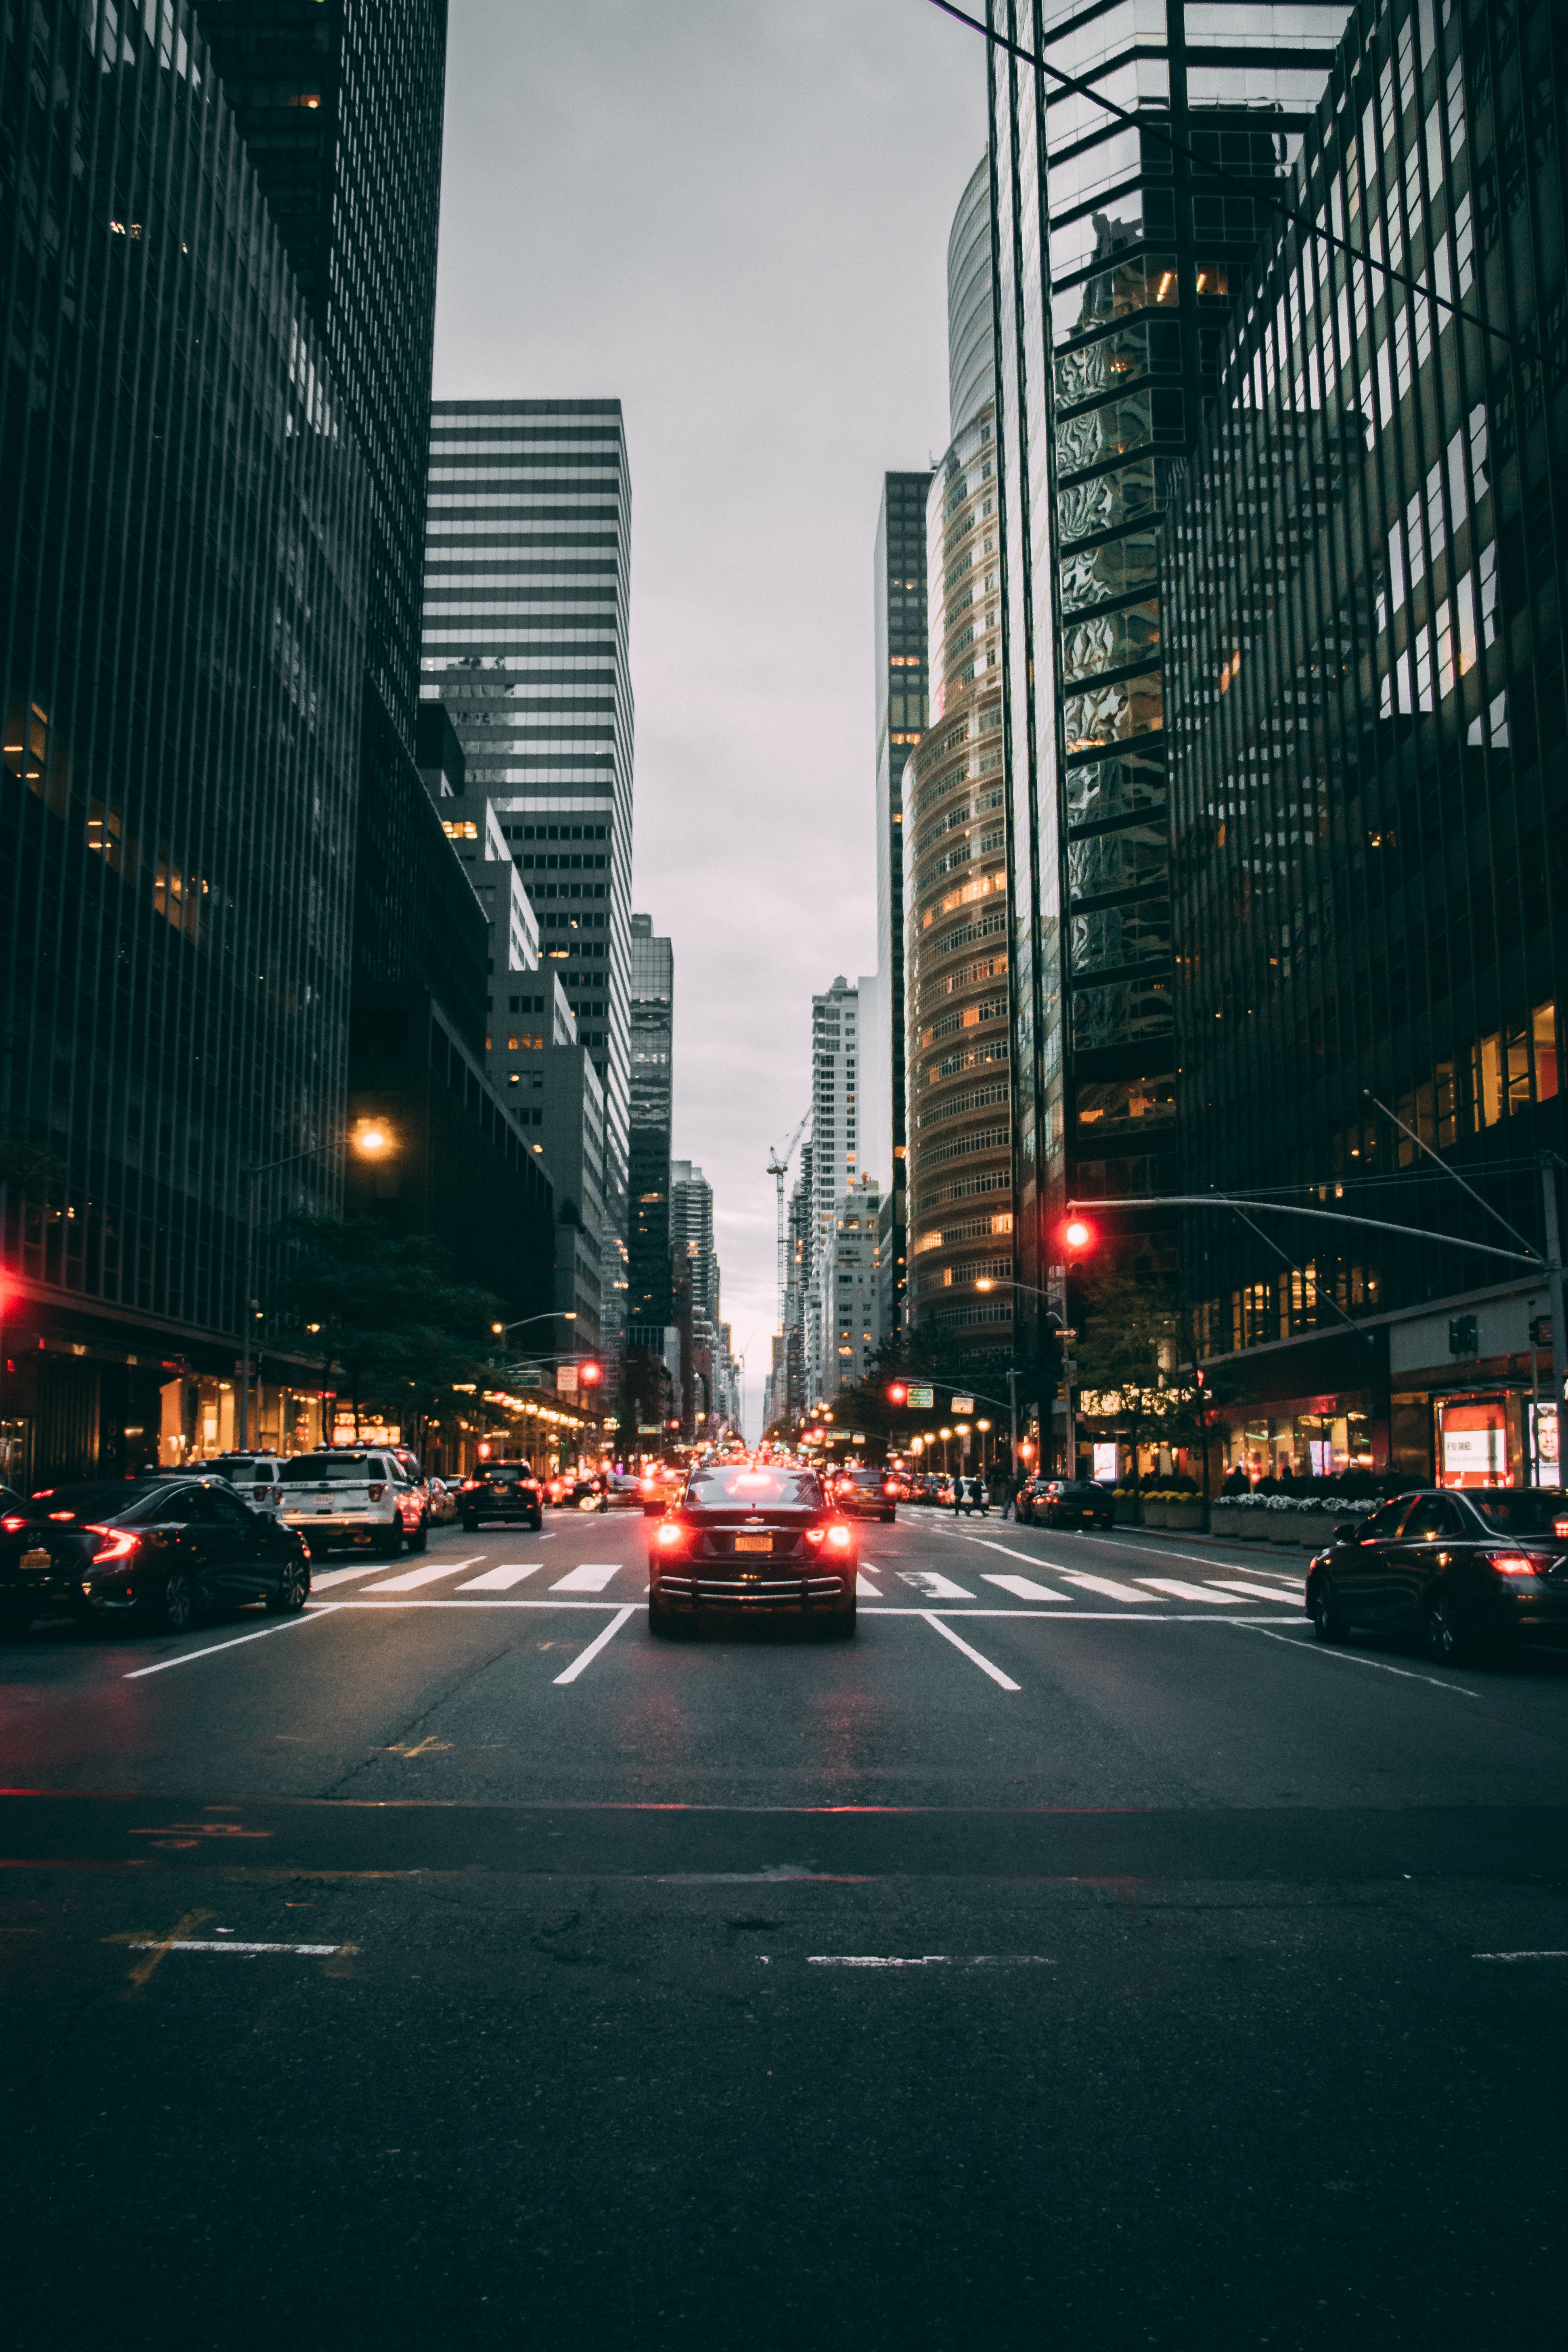 city, cities, usa, cars, building, road, traffic, movement, united states, street, new york cellphone